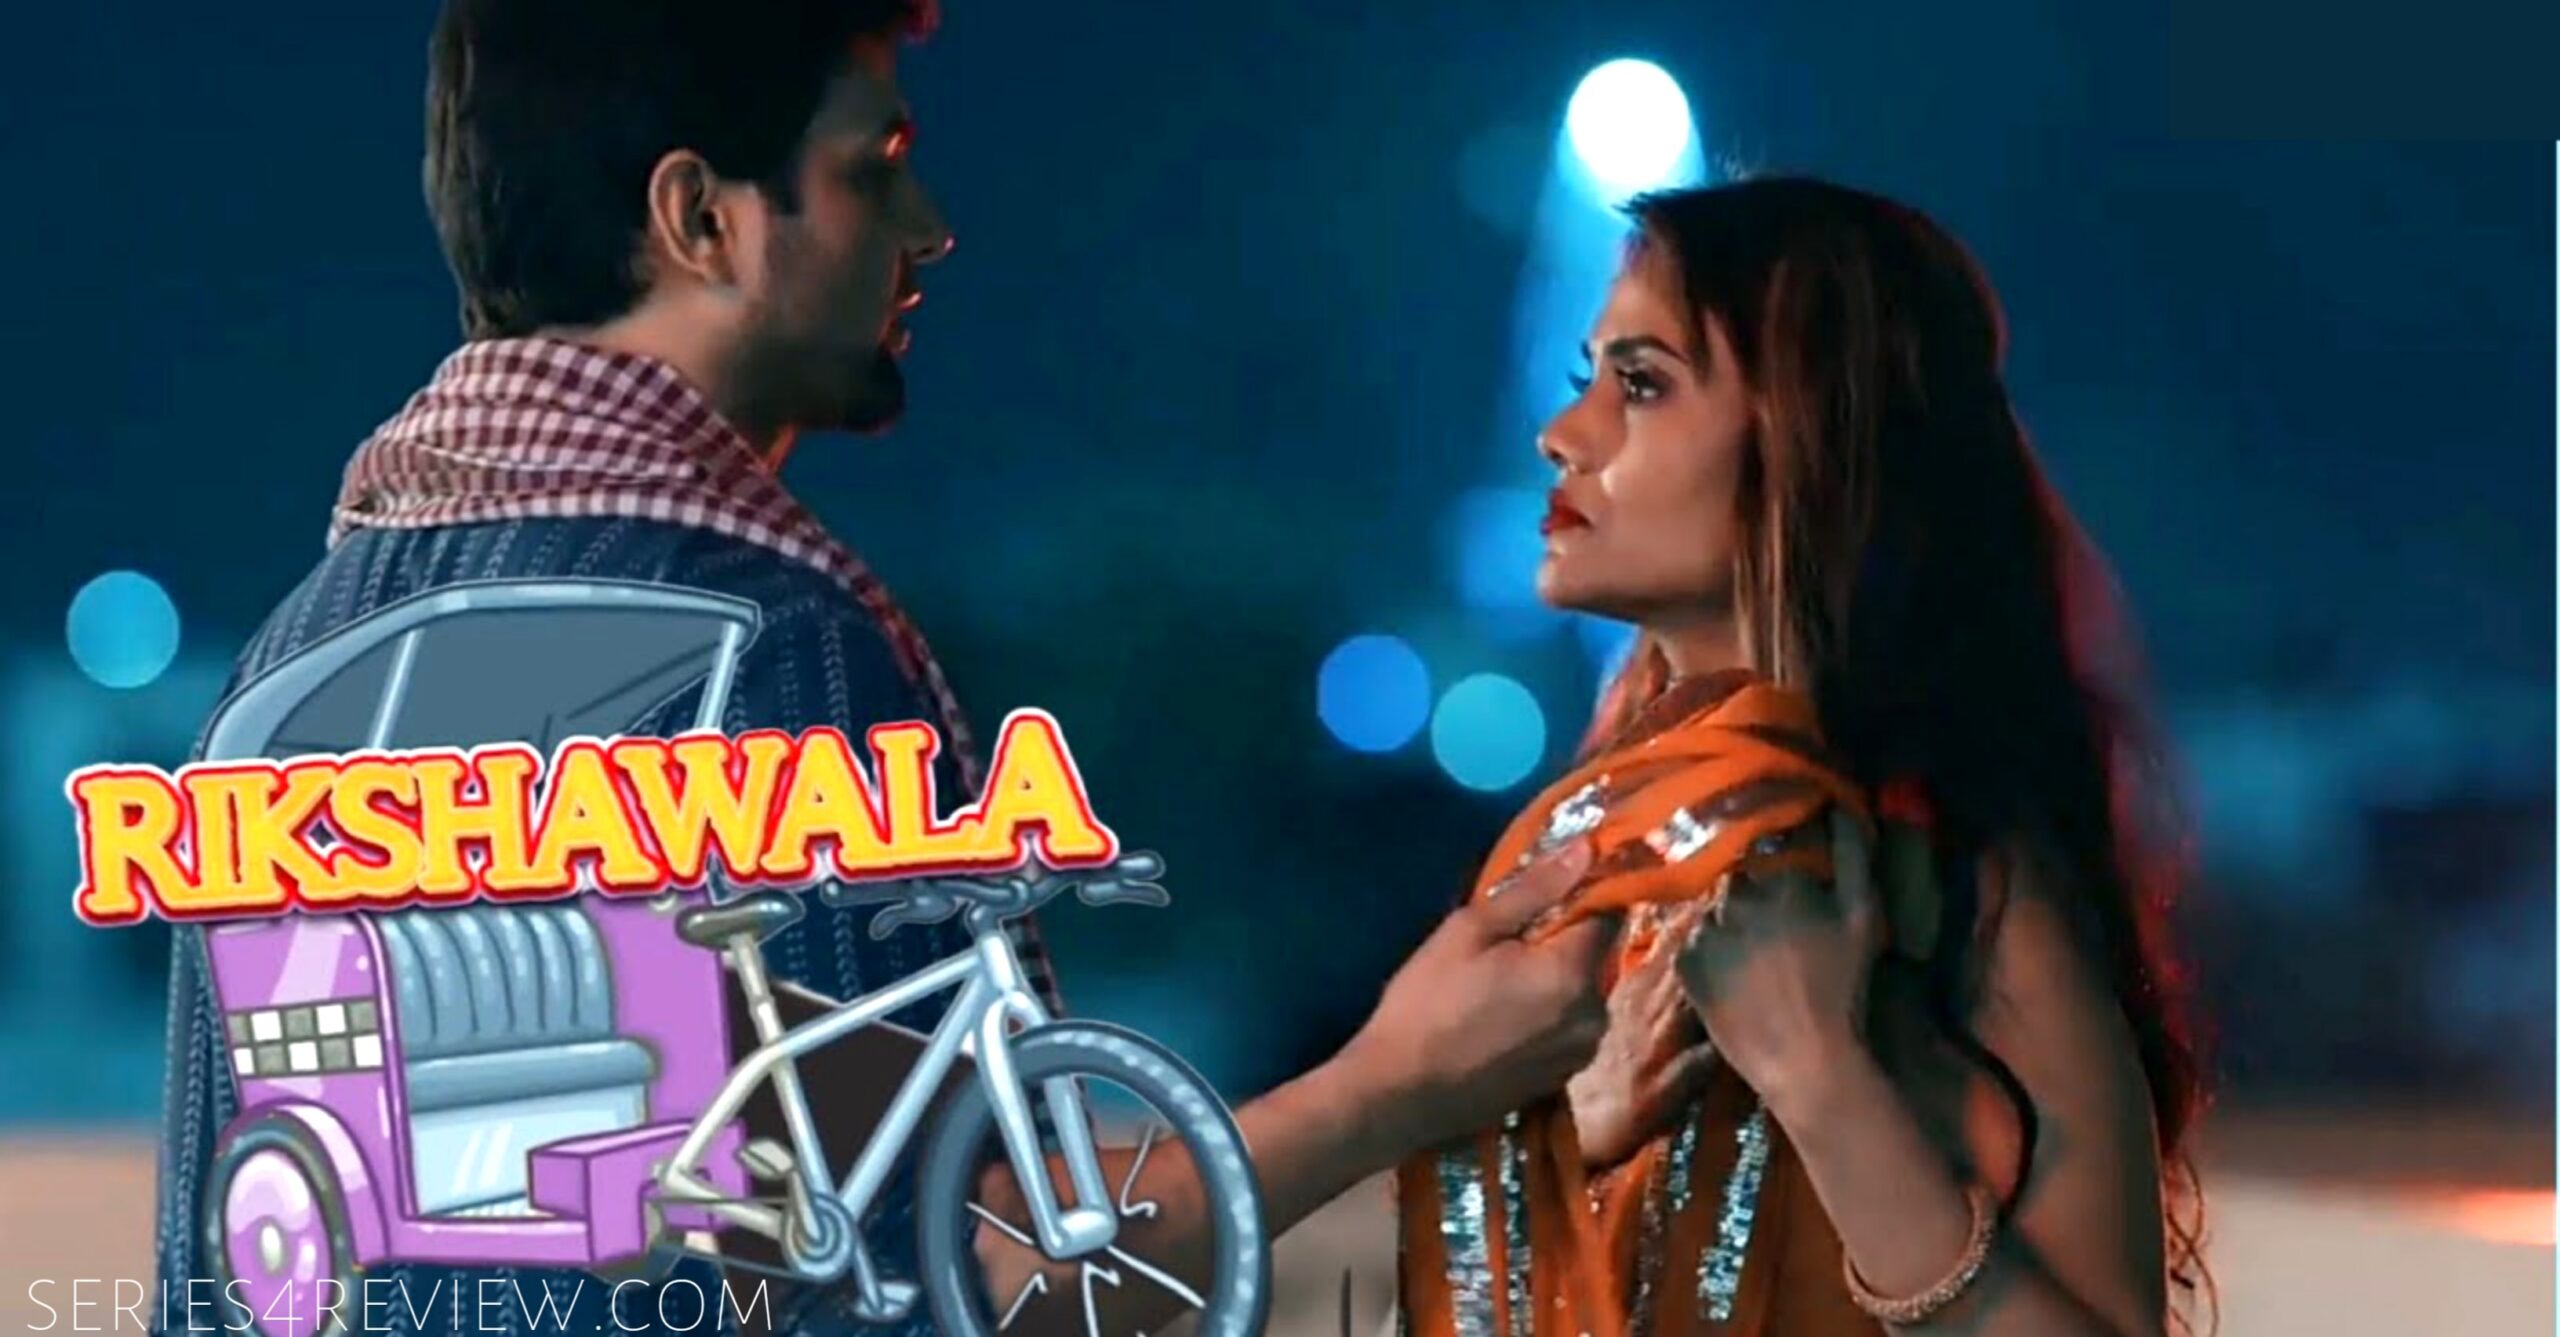 How To Watch Rickshawala Web Series All Episodes Online For Free? | Rikshawala Ullu Web Series Review 2023 Star Cast, Role Name, Release Date, Storyline More Details in Hindi